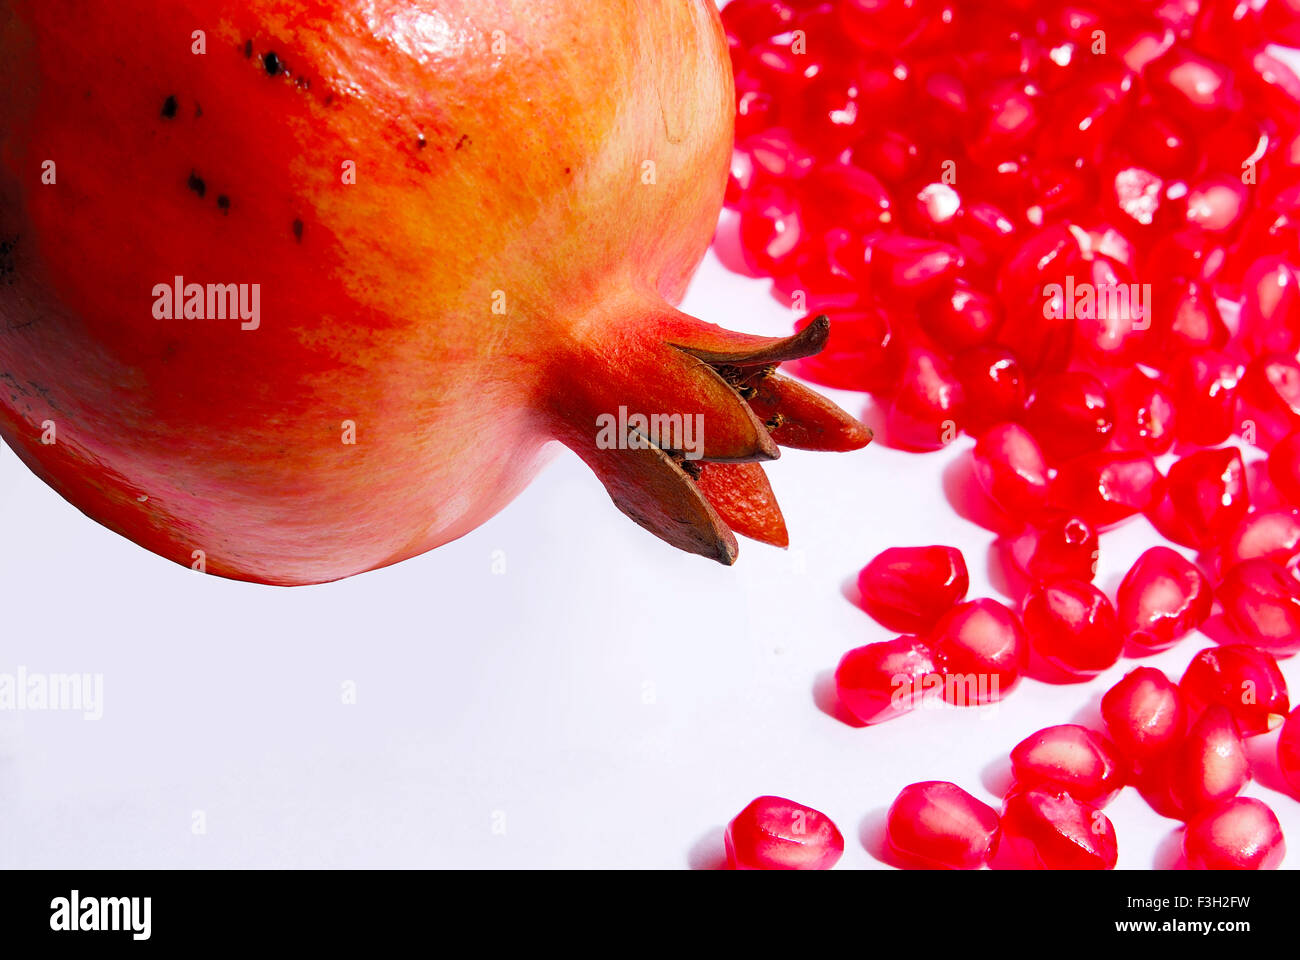 Fruits ; one full Pomegranate and seeds on white background Stock Photo